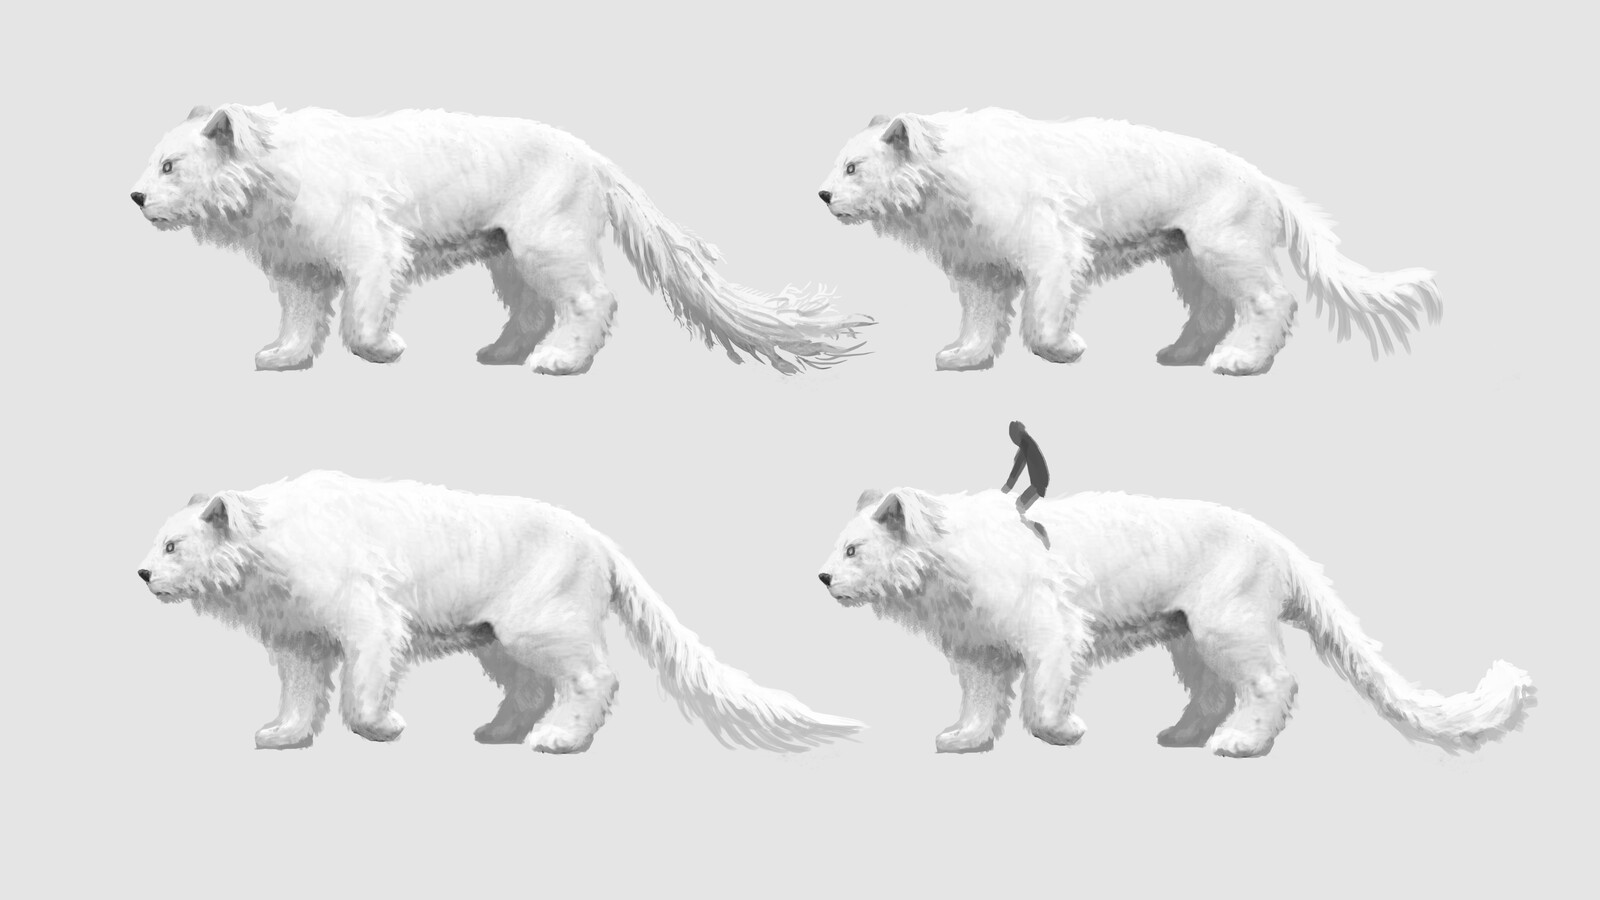 Small variations in proportions and tail